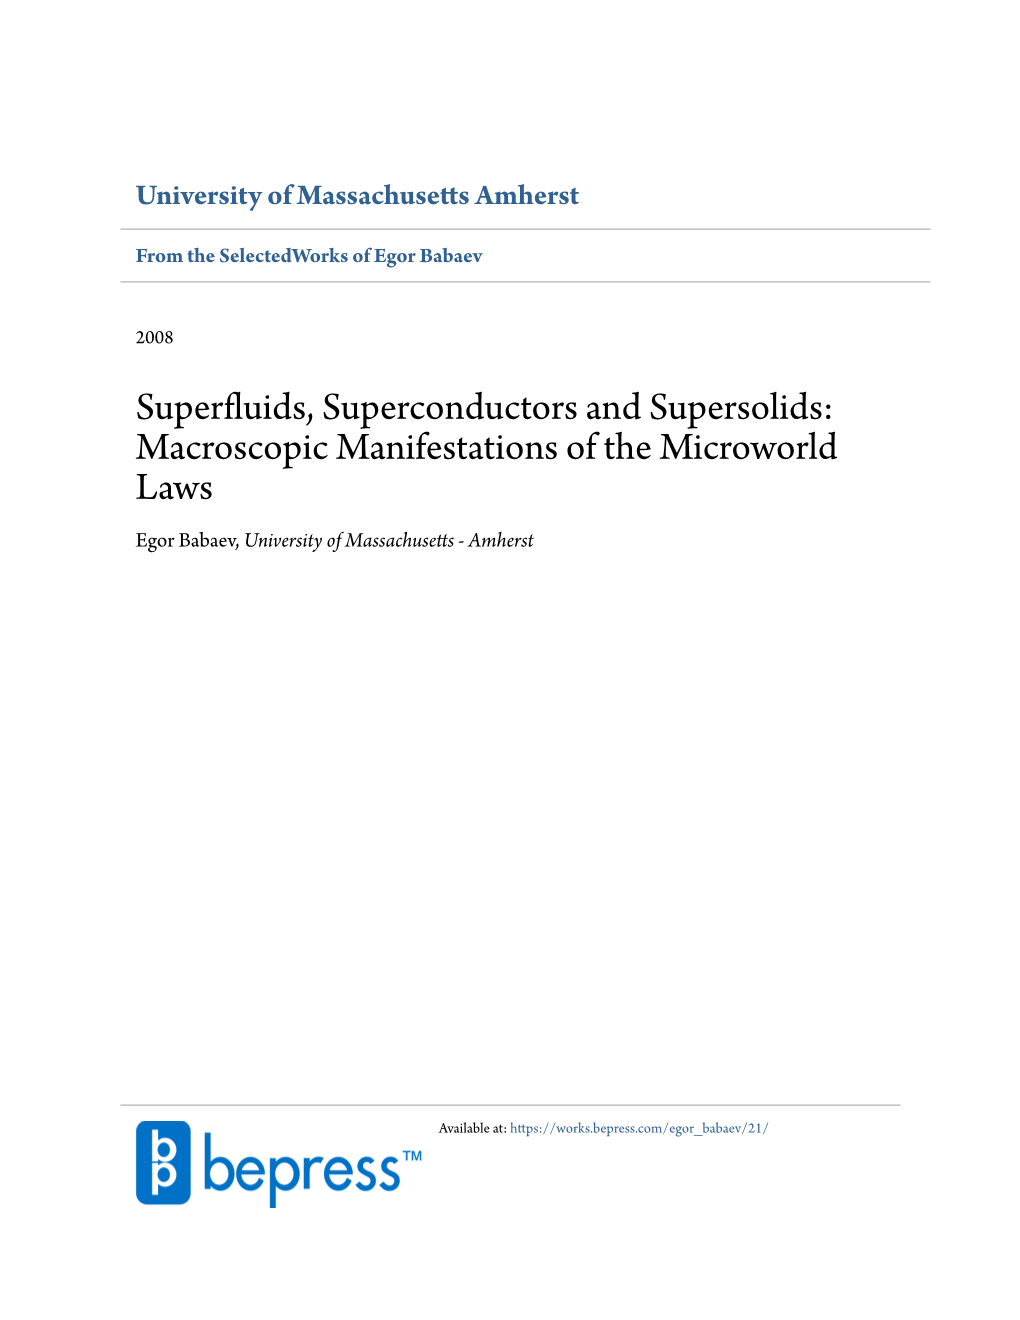 Superfluids, Superconductors and Supersolids: Macroscopic Manifestations of the Microworld Laws Egor Babaev, University of Massachusetts - Amherst